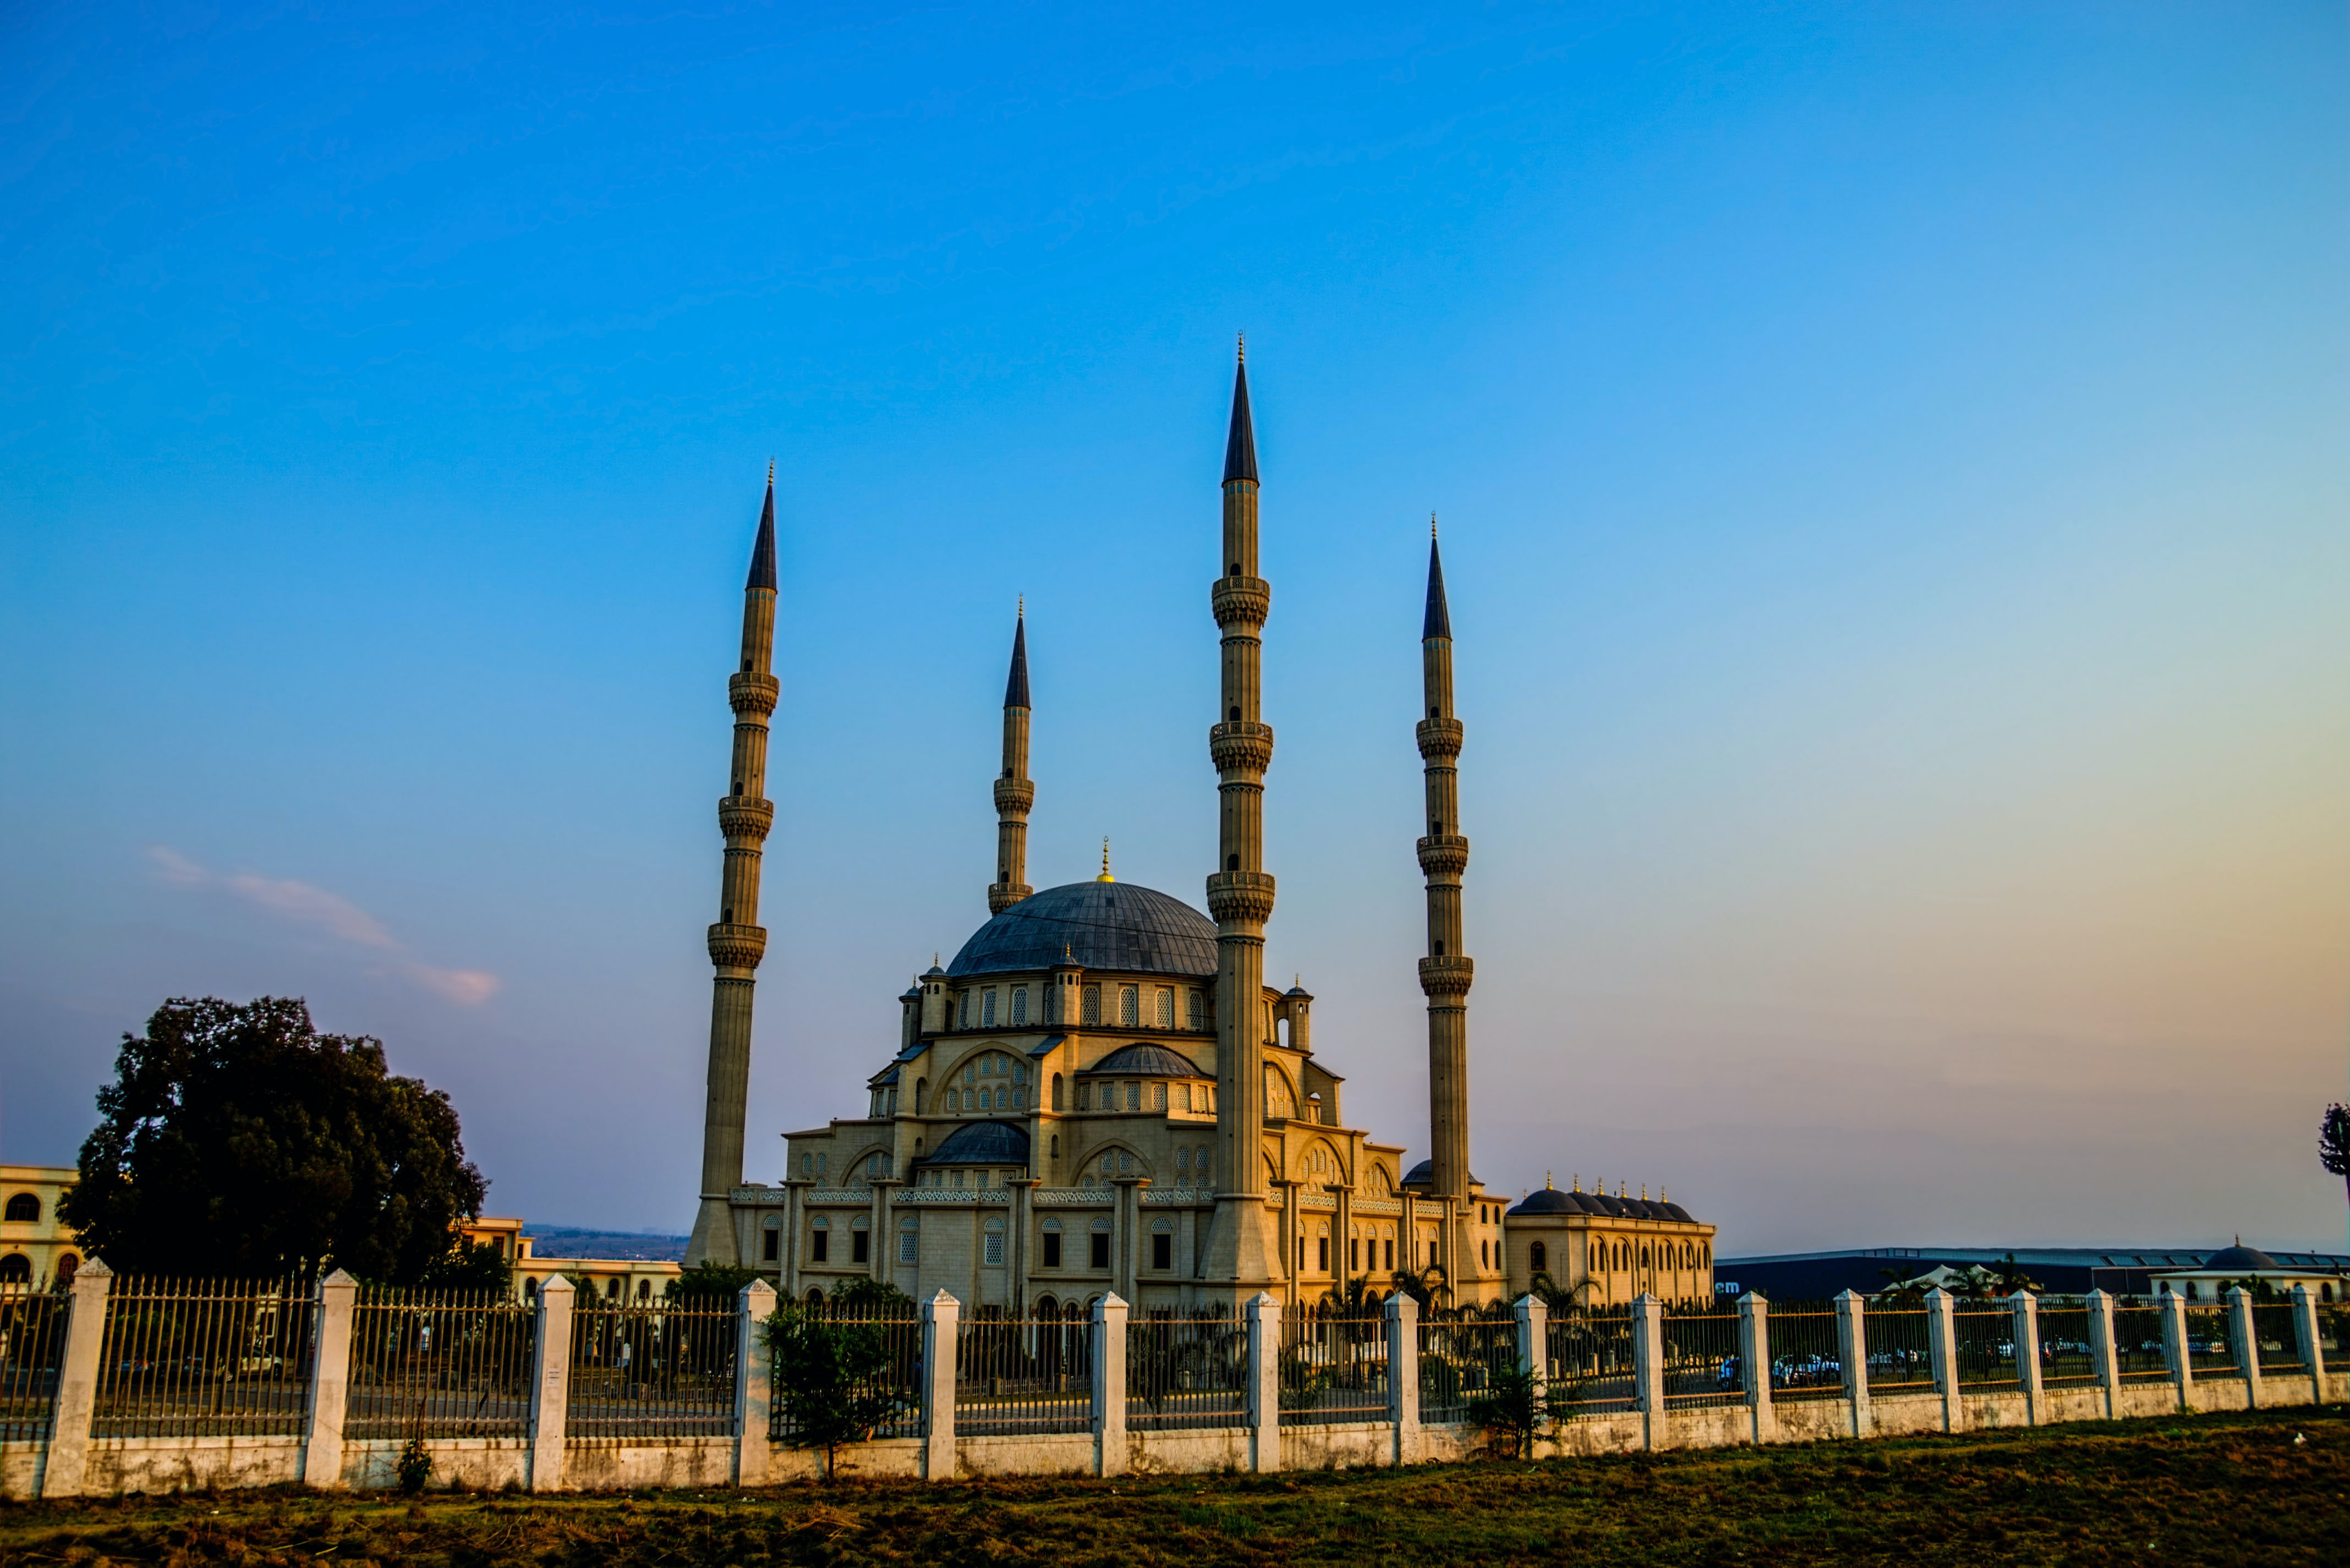 Midrand Mosque in South Africa (photo credit: paaul saad via unsplash)